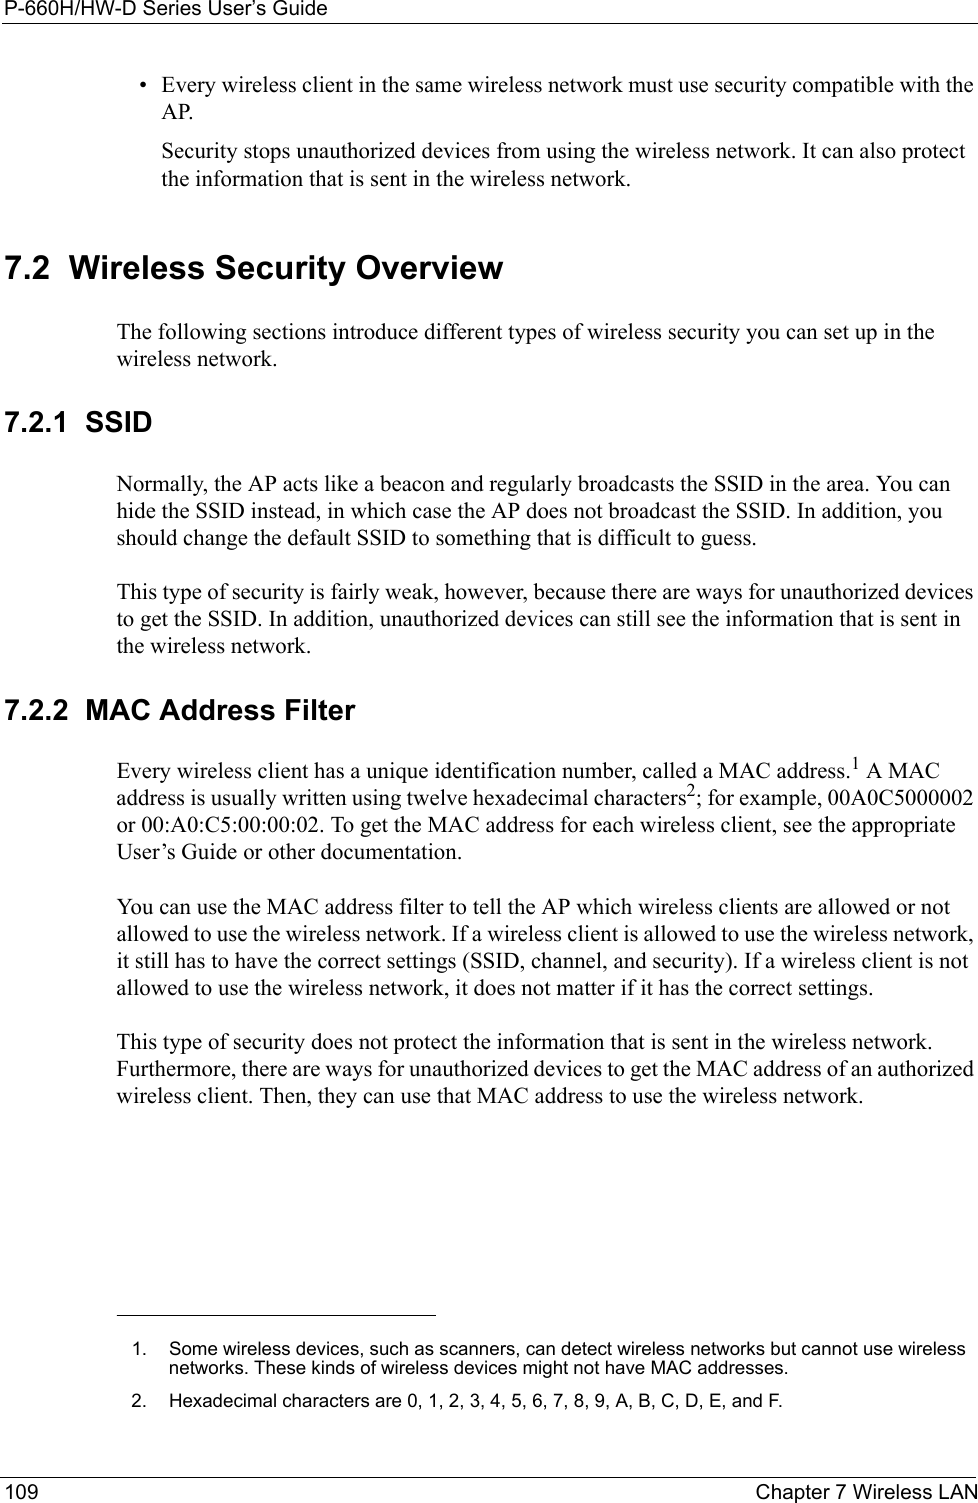 P-660H/HW-D Series User’s Guide109 Chapter 7 Wireless LAN• Every wireless client in the same wireless network must use security compatible with the AP.Security stops unauthorized devices from using the wireless network. It can also protect the information that is sent in the wireless network.7.2  Wireless Security OverviewThe following sections introduce different types of wireless security you can set up in the wireless network.7.2.1  SSIDNormally, the AP acts like a beacon and regularly broadcasts the SSID in the area. You can hide the SSID instead, in which case the AP does not broadcast the SSID. In addition, you should change the default SSID to something that is difficult to guess.This type of security is fairly weak, however, because there are ways for unauthorized devices to get the SSID. In addition, unauthorized devices can still see the information that is sent in the wireless network.7.2.2  MAC Address FilterEvery wireless client has a unique identification number, called a MAC address.1 A MAC address is usually written using twelve hexadecimal characters2; for example, 00A0C5000002 or 00:A0:C5:00:00:02. To get the MAC address for each wireless client, see the appropriate User’s Guide or other documentation.You can use the MAC address filter to tell the AP which wireless clients are allowed or not allowed to use the wireless network. If a wireless client is allowed to use the wireless network, it still has to have the correct settings (SSID, channel, and security). If a wireless client is not allowed to use the wireless network, it does not matter if it has the correct settings.This type of security does not protect the information that is sent in the wireless network. Furthermore, there are ways for unauthorized devices to get the MAC address of an authorized wireless client. Then, they can use that MAC address to use the wireless network.1. Some wireless devices, such as scanners, can detect wireless networks but cannot use wireless networks. These kinds of wireless devices might not have MAC addresses.2. Hexadecimal characters are 0, 1, 2, 3, 4, 5, 6, 7, 8, 9, A, B, C, D, E, and F.